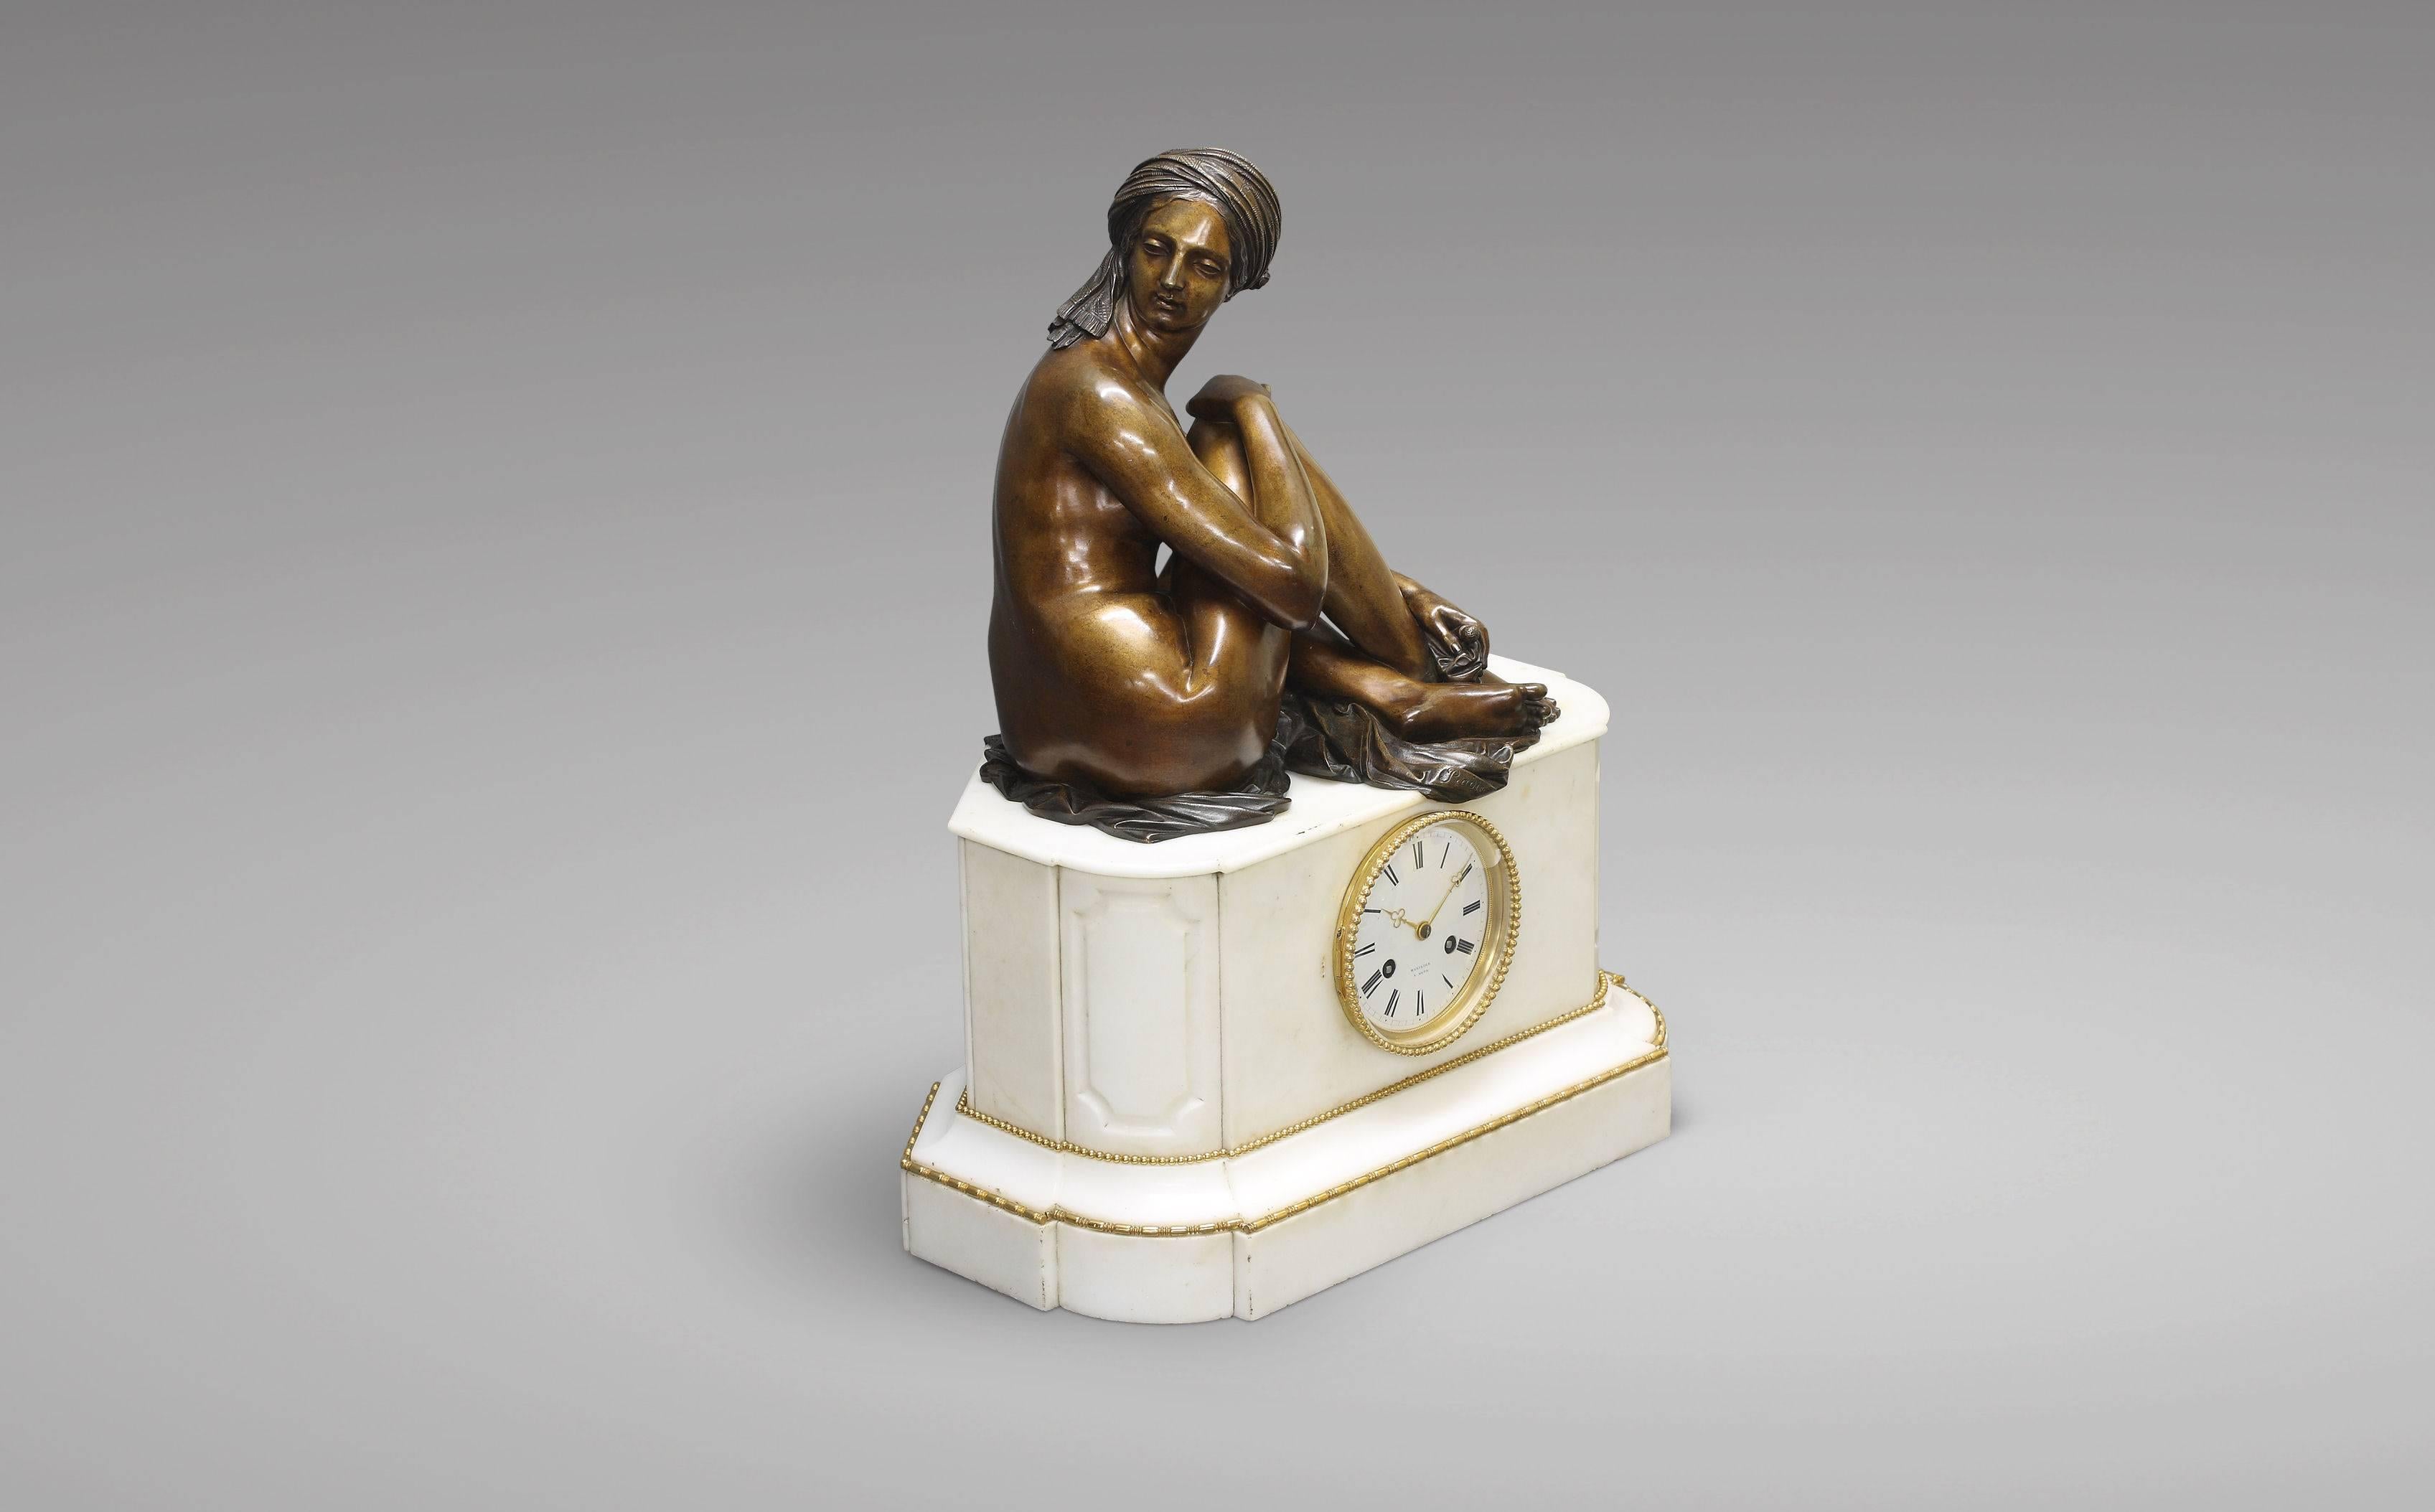 White Marble Clock with a Bronze Statue of an 